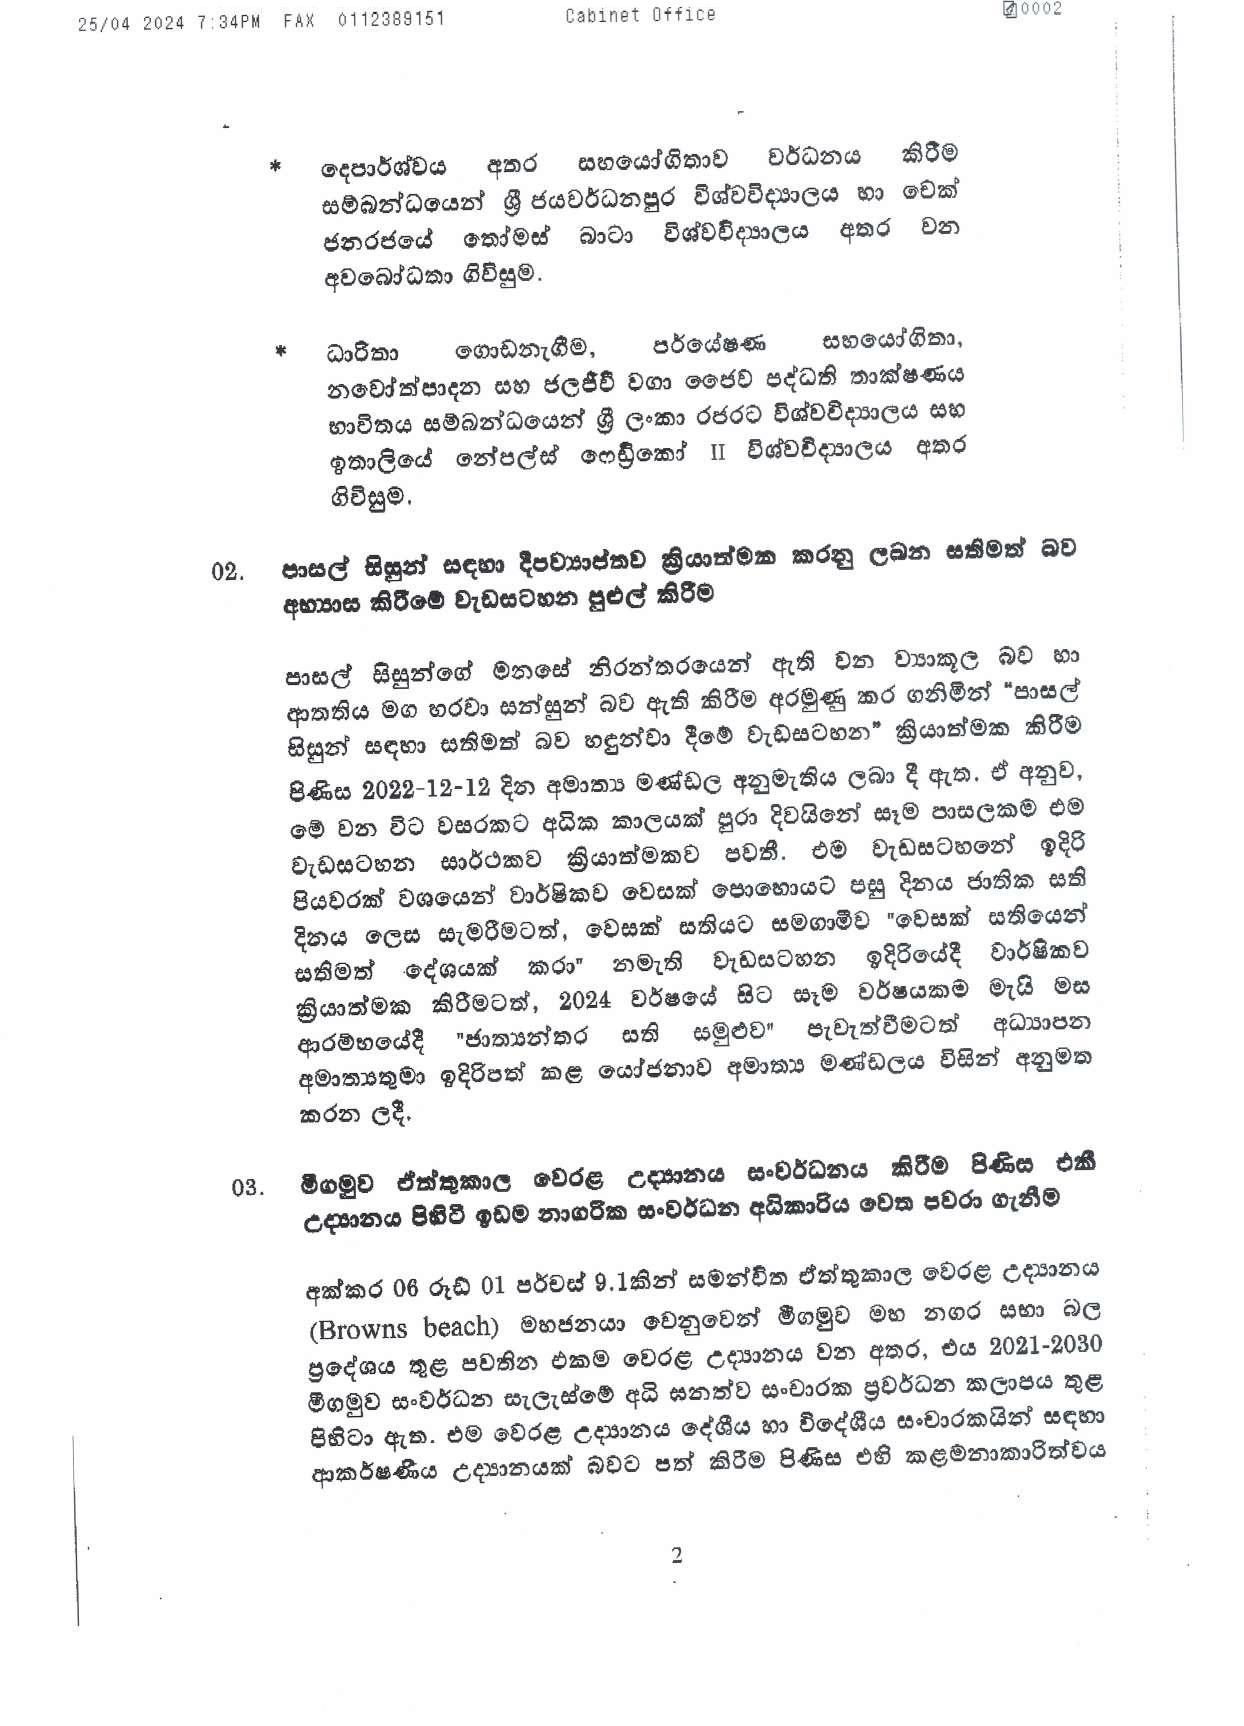 Cabinet Decision on 25.04.2024 page 002